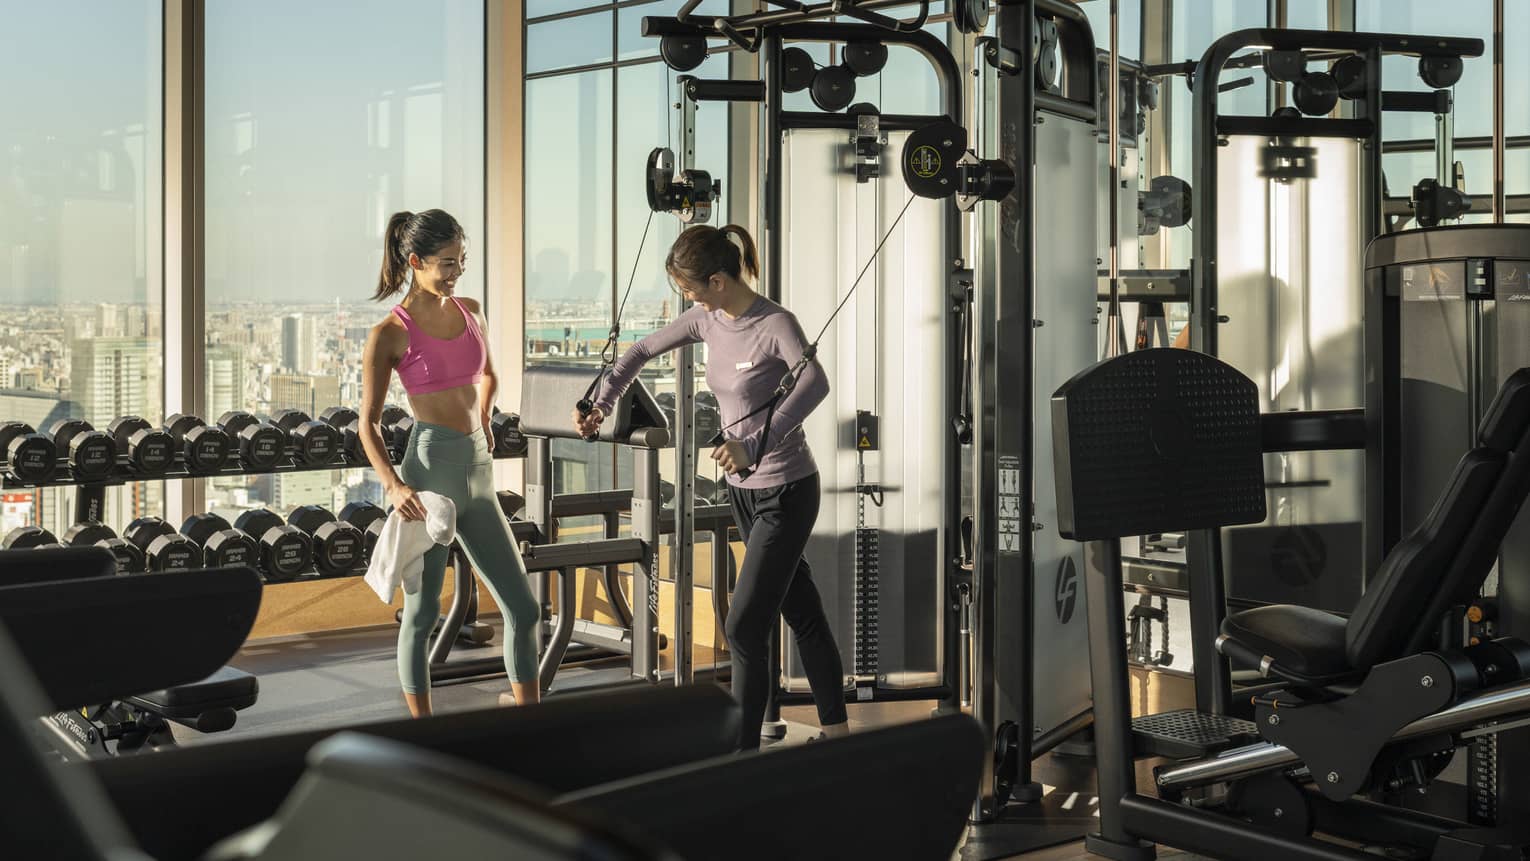 Trainer shows woman how to use exercise machine during a private session